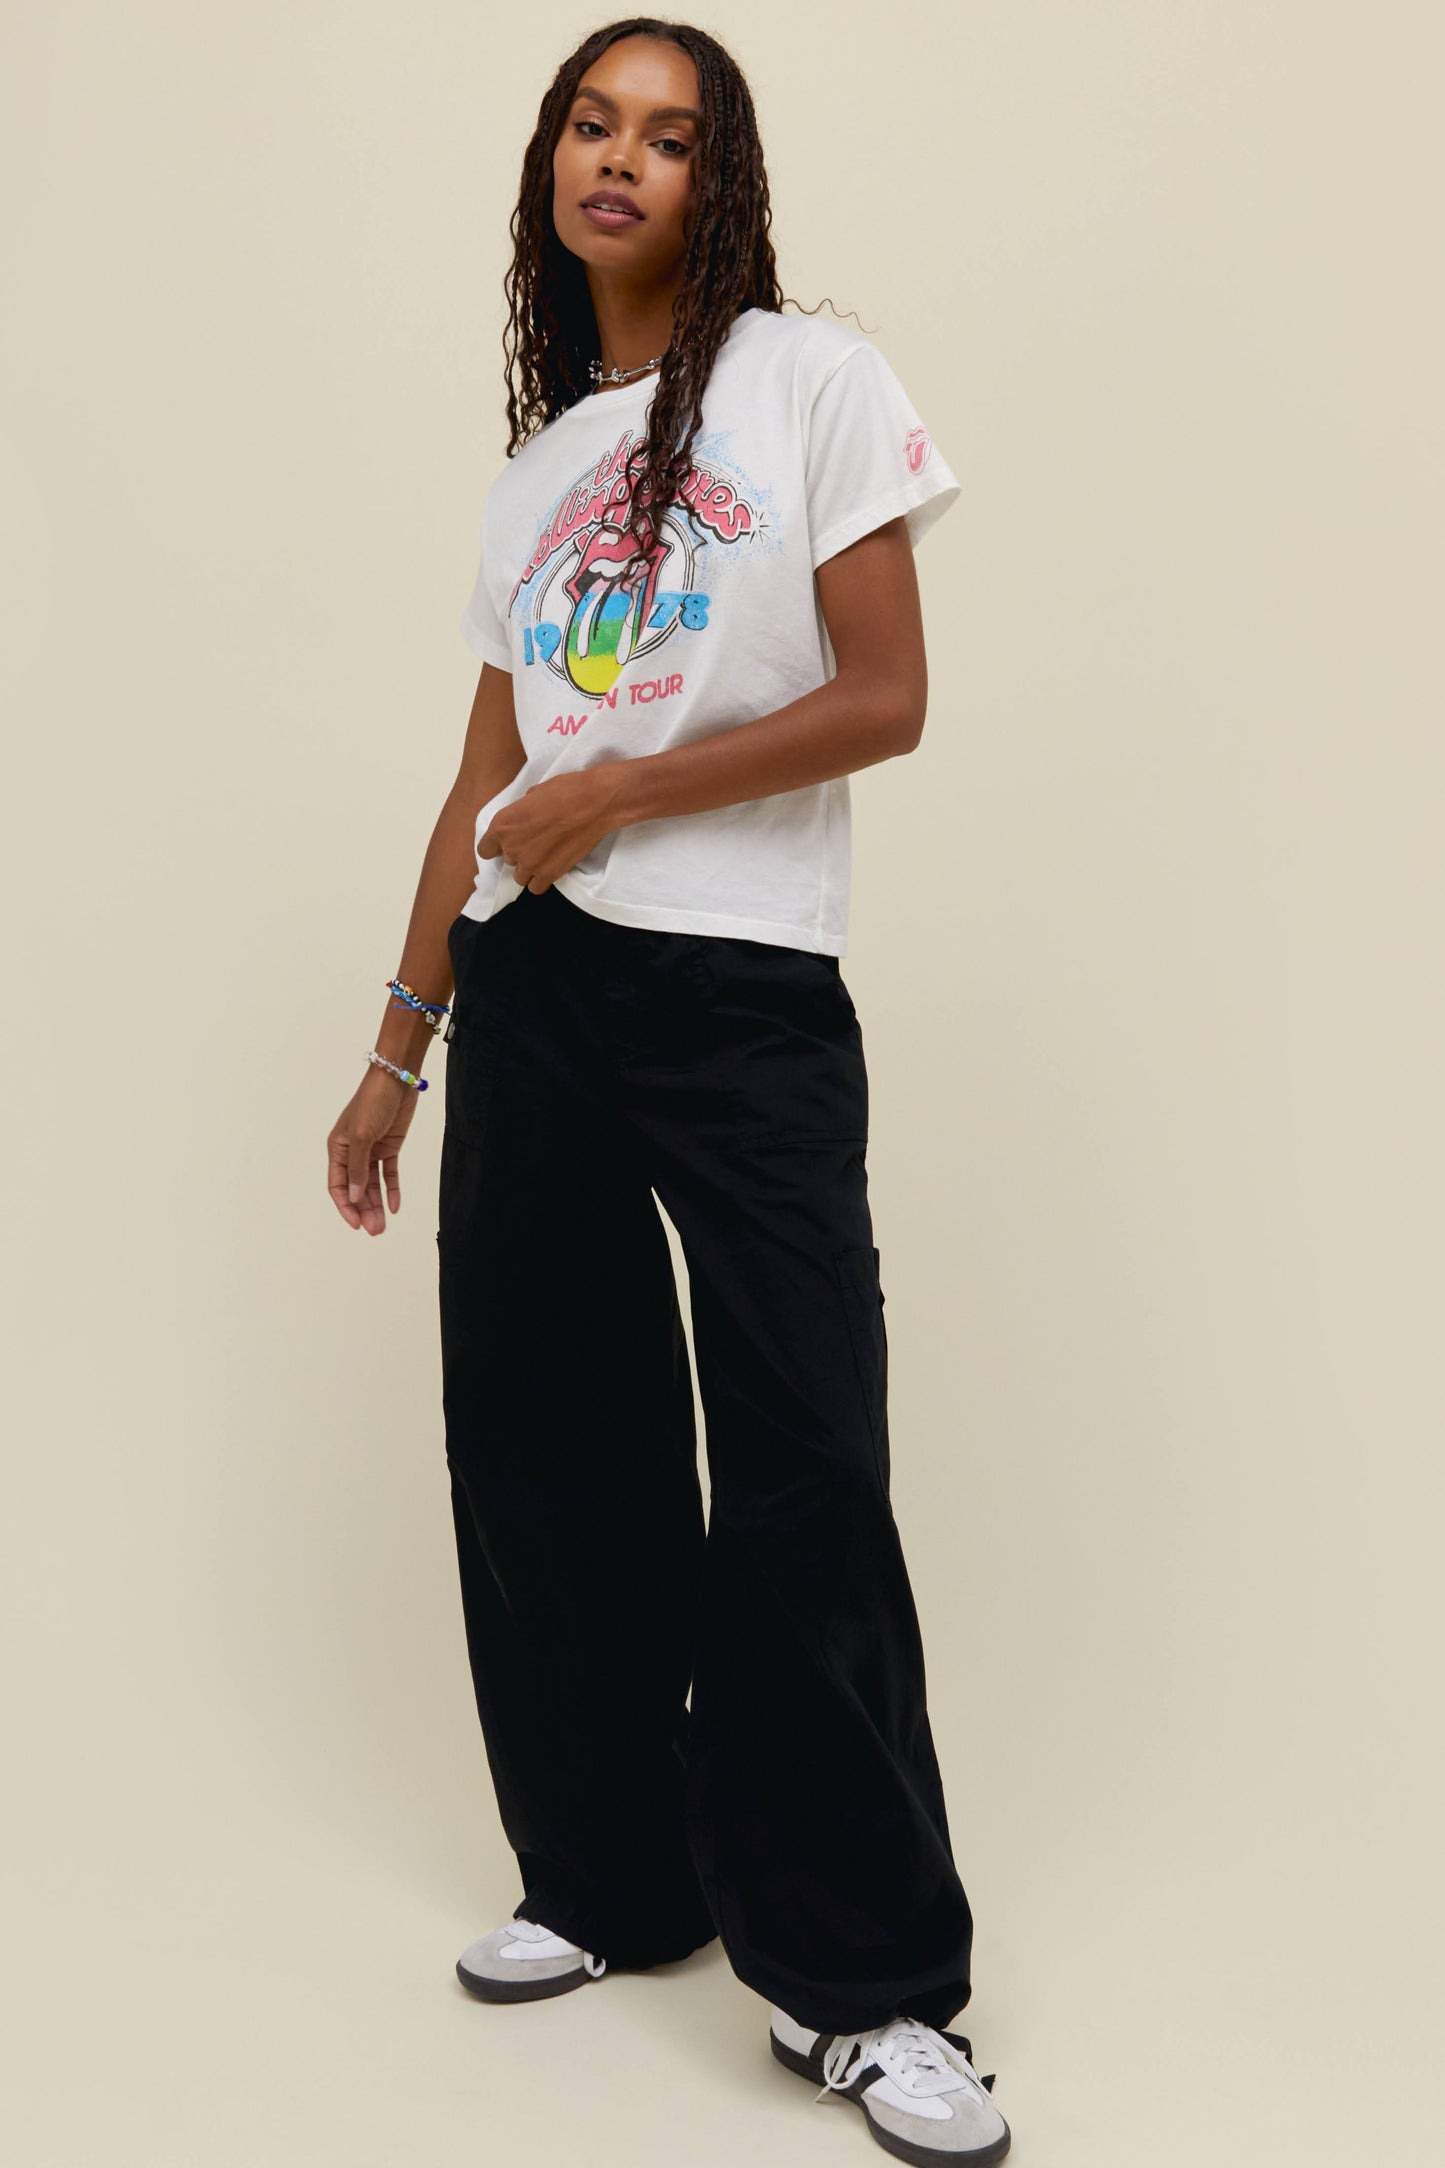 A dark-haired model featuring a white tee designed with the classic Rolling Stones logo in the center